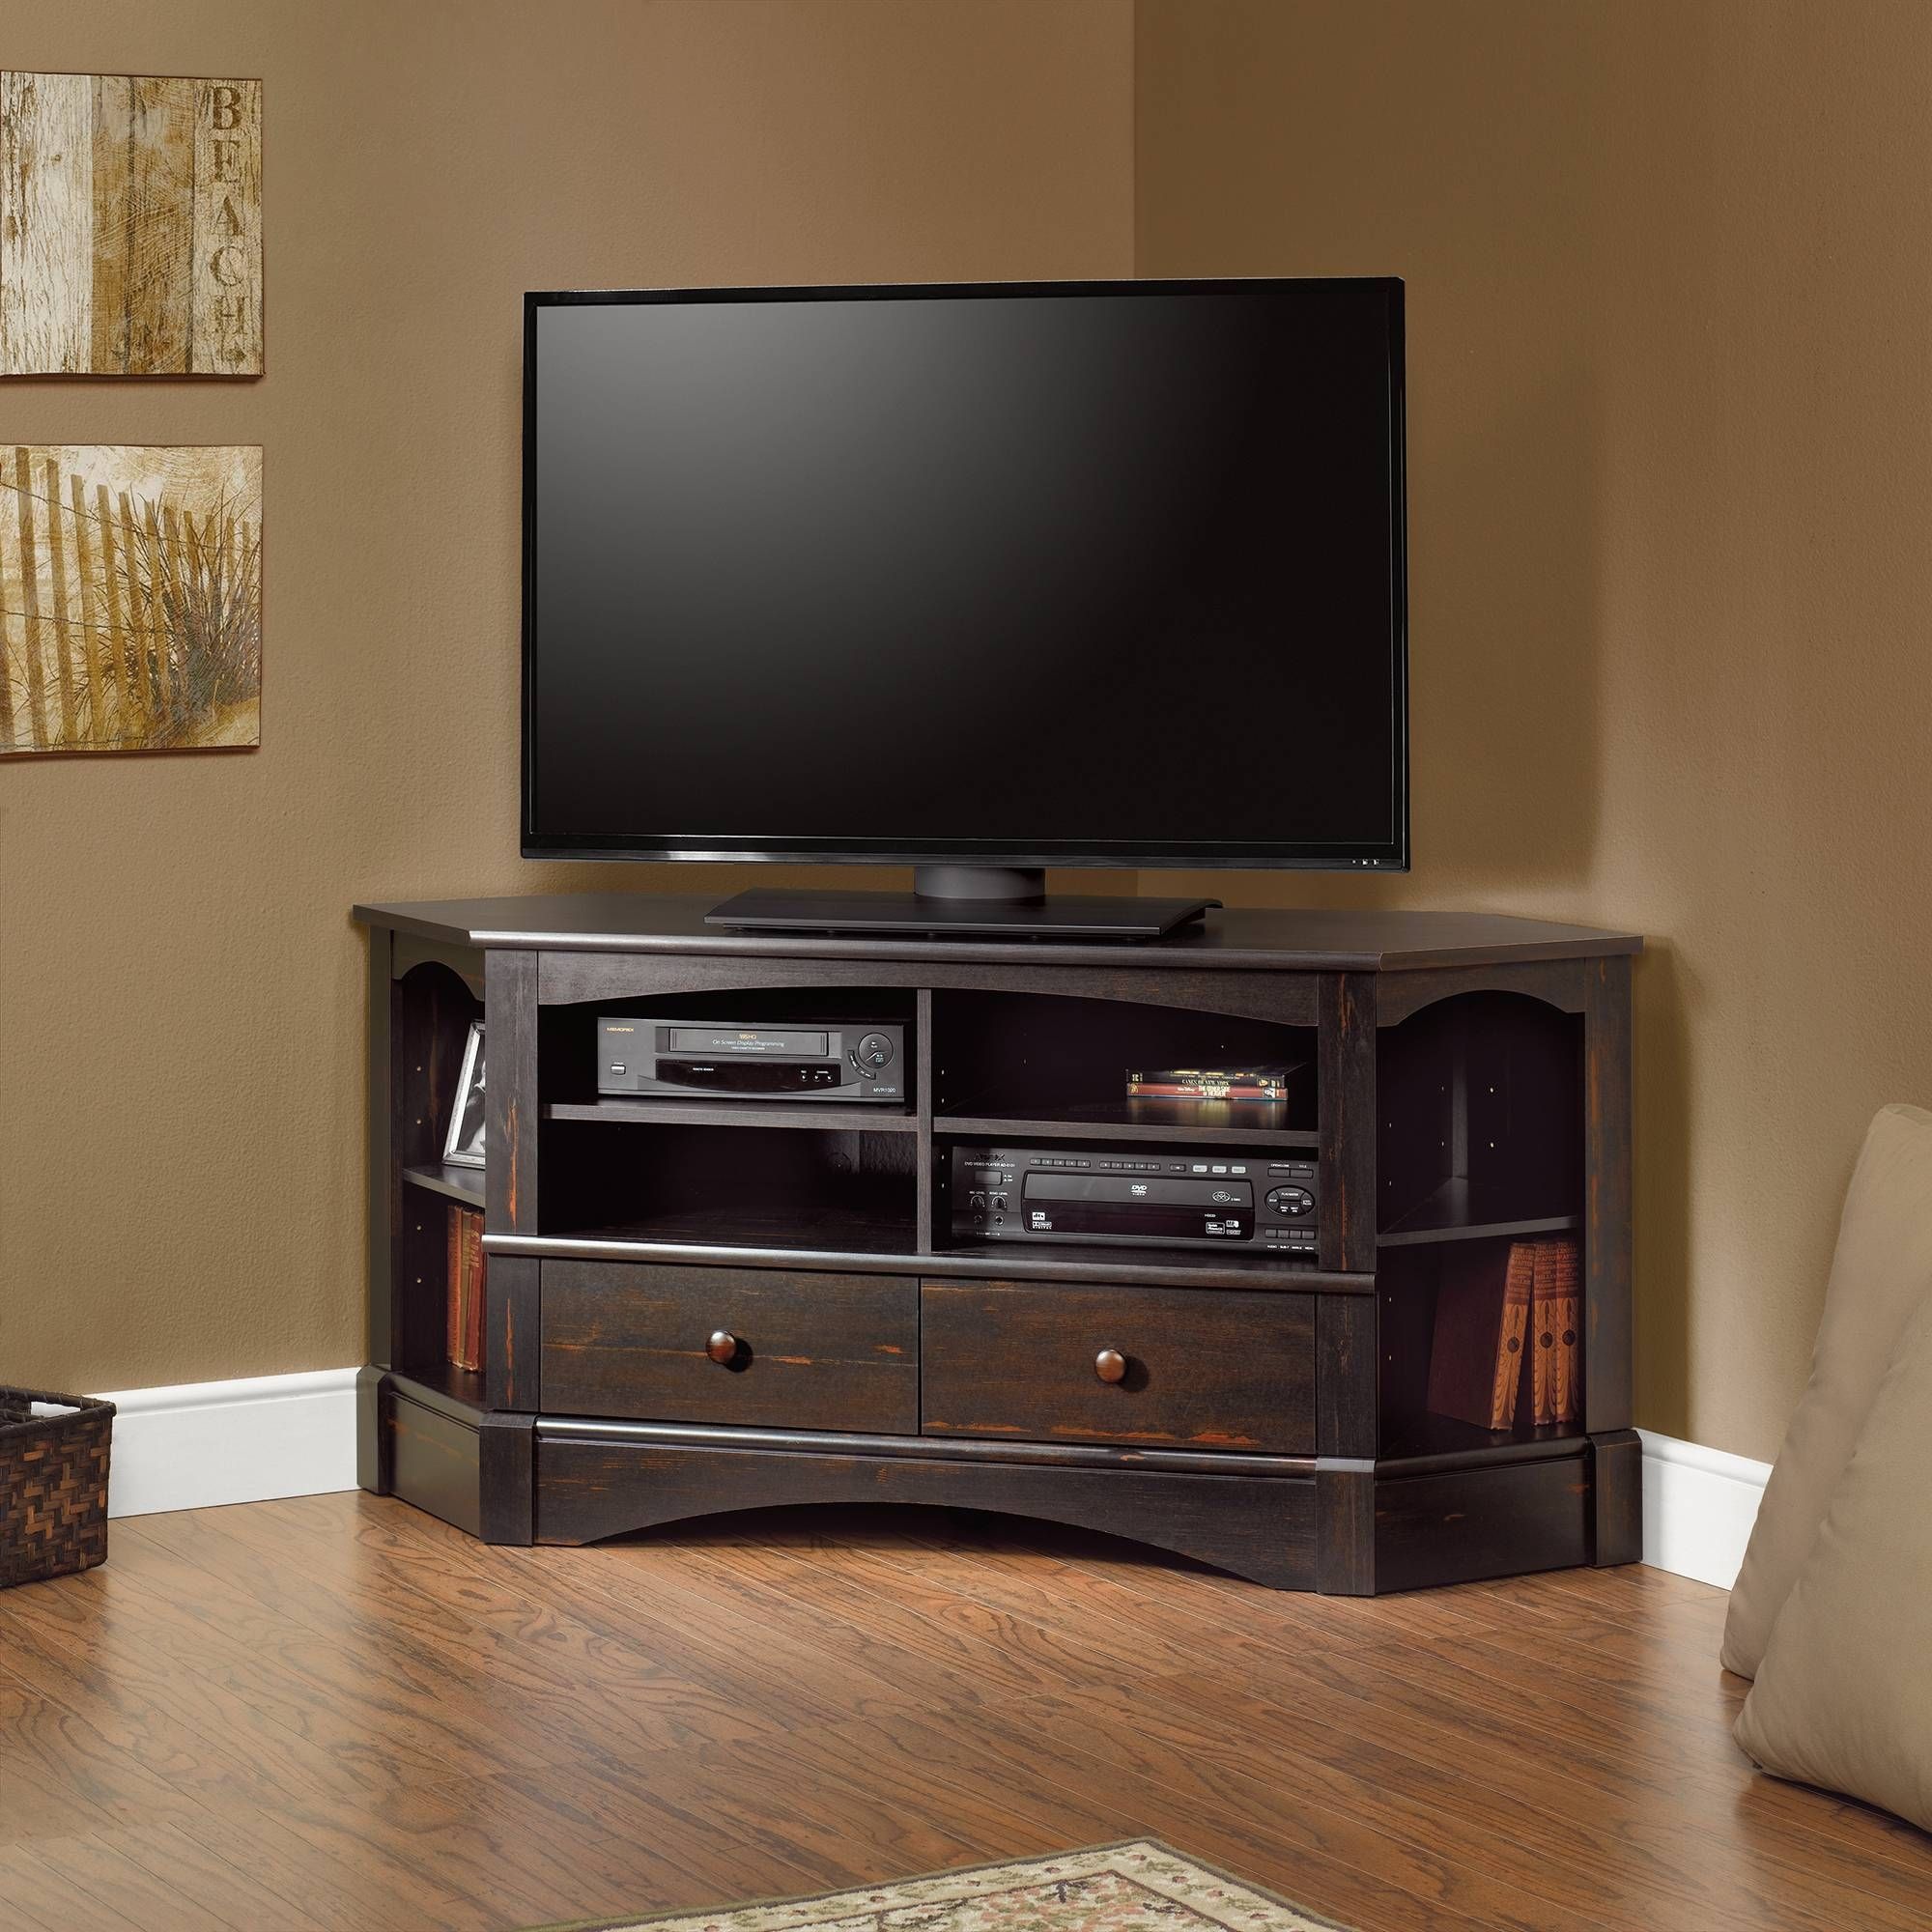 Harbor View | Corner Entertainment Credenza | 402902 | Sauder Pertaining To Large Corner Tv Cabinets (View 8 of 15)